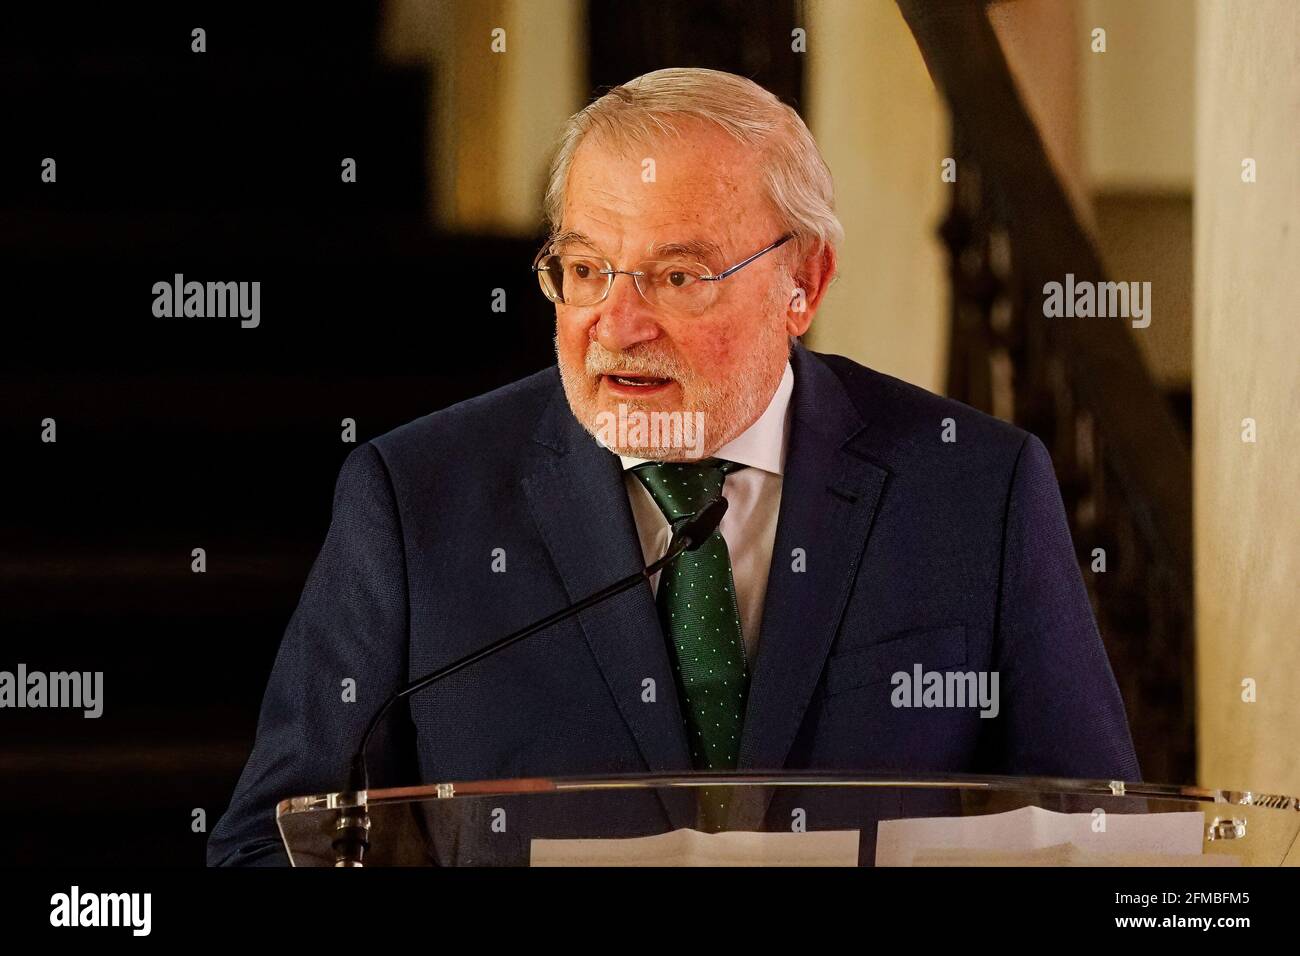 Malaga, Spain. 07th May, 2021. President of Unicaja, Manuel Azuaga speaking during the exhibition at Centro Cultural Fundacion Unicaja. 'Un siglo de esplendor' is an exhibition that shows the artistic heritage of the Holy Week brotherhoods of Malaga and is one of the events organized by Agrupacion de Cofradias de Semana Santa de Malaga for the centenary of the institution. Credit: SOPA Images Limited/Alamy Live News Stock Photo